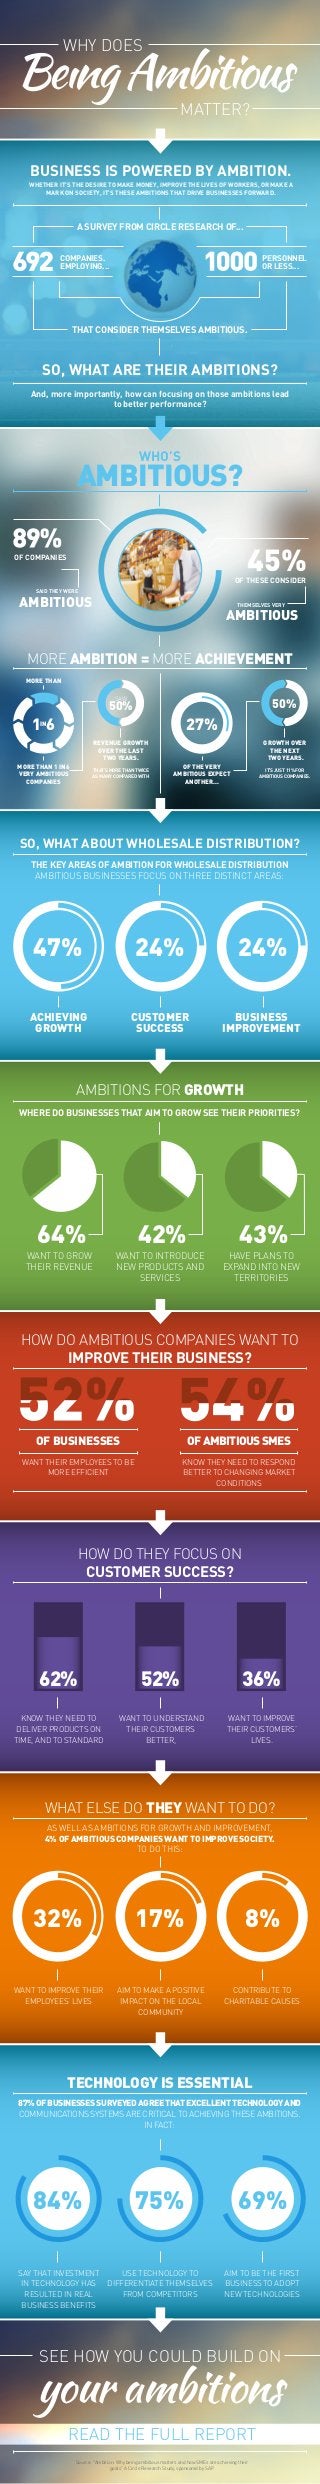 A SURVEY FROM CIRCLE RESEARCH OF...
OF COMPANIES
45%OF THESE CONSIDER
MORE AMBITION = MORE ACHIEVEMENT
MORE THAN
AMBITIOUS?
WHO’S
SAID THEY WERE
AMBITIOUS THEMSELVES VERY
AMBITIOUS
MATTER?
WHY DOES
COMPANIES.
EMPLOYING...
PERSONNEL
OR LESS...
BUSINESS IS POWERED BY AMBITION.
WHETHER IT’S THE DESIRE TO MAKE MONEY, IMPROVE THE LIVES OF WORKERS, OR MAKE A
MARK ON SOCIETY, IT’S THESE AMBITIONS THAT DRIVE BUSINESSES FORWARD.
SO, WHAT ARE THEIR AMBITIONS?
And, more importantly, how can focusing on those ambitions lead
to better performance?
THAT CONSIDER THEMSELVES AMBITIOUS.
MORE THAN 1 IN 6
VERY AMBITIOUS
COMPANIES
50%
SAW
1IN
6
REVENUE GROWTH
OVER THE LAST
TWO YEARS.
THAT’SMORETHANTWICE
ASMANYCOMPAREDWITH
27%
OF THE VERY
AMBITIOUS EXPECT
ANOTHER...
50%
GROWTH OVER
THE NEXT
TWO YEARS.
IT’SJUST11%FOR
AMBITIOUSCOMPANIES.
THE KEY AREAS OF AMBITION FOR WHOLESALE DISTRIBUTION
AMBITIOUS BUSINESSES FOCUS ON THREE DISTINCT AREAS:
47%
ACHIEVING
GROWTH
24% 24%
CUSTOMER
SUCCESS
BUSINESS
IMPROVEMENT
AMBITIONS FOR GROWTH
WHERE DO BUSINESSES THAT AIM TO GROW SEE THEIR PRIORITIES?
WANT TO GROW
THEIR REVENUE
64%
WANT TO INTRODUCE
NEW PRODUCTS AND
SERVICES
42%
HAVE PLANS TO
EXPAND INTO NEW
TERRITORIES
43%
HOW DO AMBITIOUS COMPANIES WANT TO
IMPROVE THEIR BUSINESS?
OF BUSINESSES
WANT THEIR EMPLOYEES TO BE
MORE EFFICIENT
OFAMBITIOUSSMES
KNOW THEY NEED TO RESPOND
BETTER TO CHANGING MARKET
CONDITIONS
HOW DO THEY FOCUS ON
CUSTOMER SUCCESS?
62%
KNOW THEY NEED TO
DELIVER PRODUCTS ON
TIME, AND TO STANDARD
52%
WANT TO UNDERSTAND
THEIR CUSTOMERS
BETTER,
36%
WANT TO IMPROVE
THEIR CUSTOMERS’
LIVES.
WHAT ELSE DO THEY WANT TO DO?
AS WELL AS AMBITIONS FOR GROWTH AND IMPROVEMENT,
4% OF AMBITIOUS COMPANIES WANT TO IMPROVE SOCIETY.
TO DO THIS:
TECHNOLOGY IS ESSENTIAL
87%OFBUSINESSESSURVEYEDAGREETHATEXCELLENTTECHNOLOGYAND
COMMUNICATIONS SYSTEMS ARE CRITICAL TO ACHIEVING THESE AMBITIONS.
IN FACT:
84% 75% 69%
SAY THAT INVESTMENT
IN TECHNOLOGY HAS
RESULTED IN REAL
BUSINESS BENEFITS
USE TECHNOLOGY TO
DIFFERENTIATE THEMSELVES
FROM COMPETITORS
AIM TO BE THE FIRST
BUSINESS TO ADOPT
NEW TECHNOLOGIES
SEE HOW YOU COULD BUILD ON
your ambitions
Source: "Ambition: Why being ambitious matters and how SMEs are achieving their
goals" A Circle Research Study, sponsored by SAP
READ THE FULL REPORT
17% 8%
WANT TO IMPROVE THEIR
EMPLOYEES’ LIVES
AIM TO MAKE A POSITIVE
IMPACT ON THE LOCAL
COMMUNITY
CONTRIBUTE TO
CHARITABLE CAUSES
32%
SO, WHAT ABOUT WHOLESALE DISTRIBUTION?
 